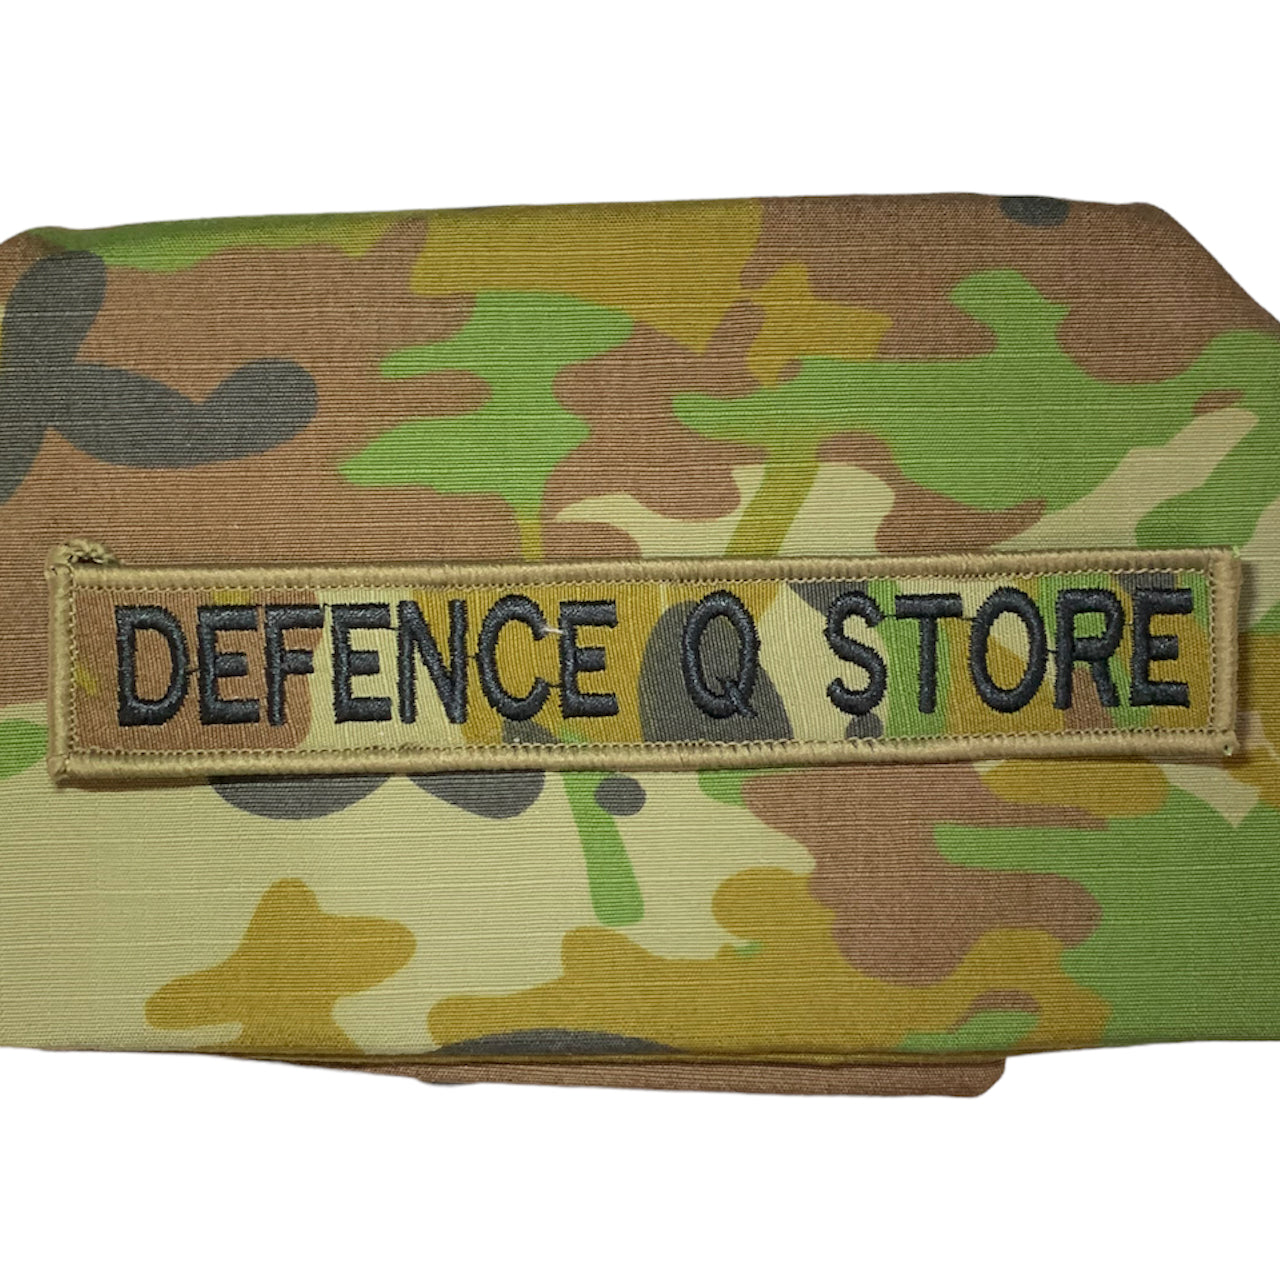 Military Shop - Delivering Quality Military Supplies Australia Wide